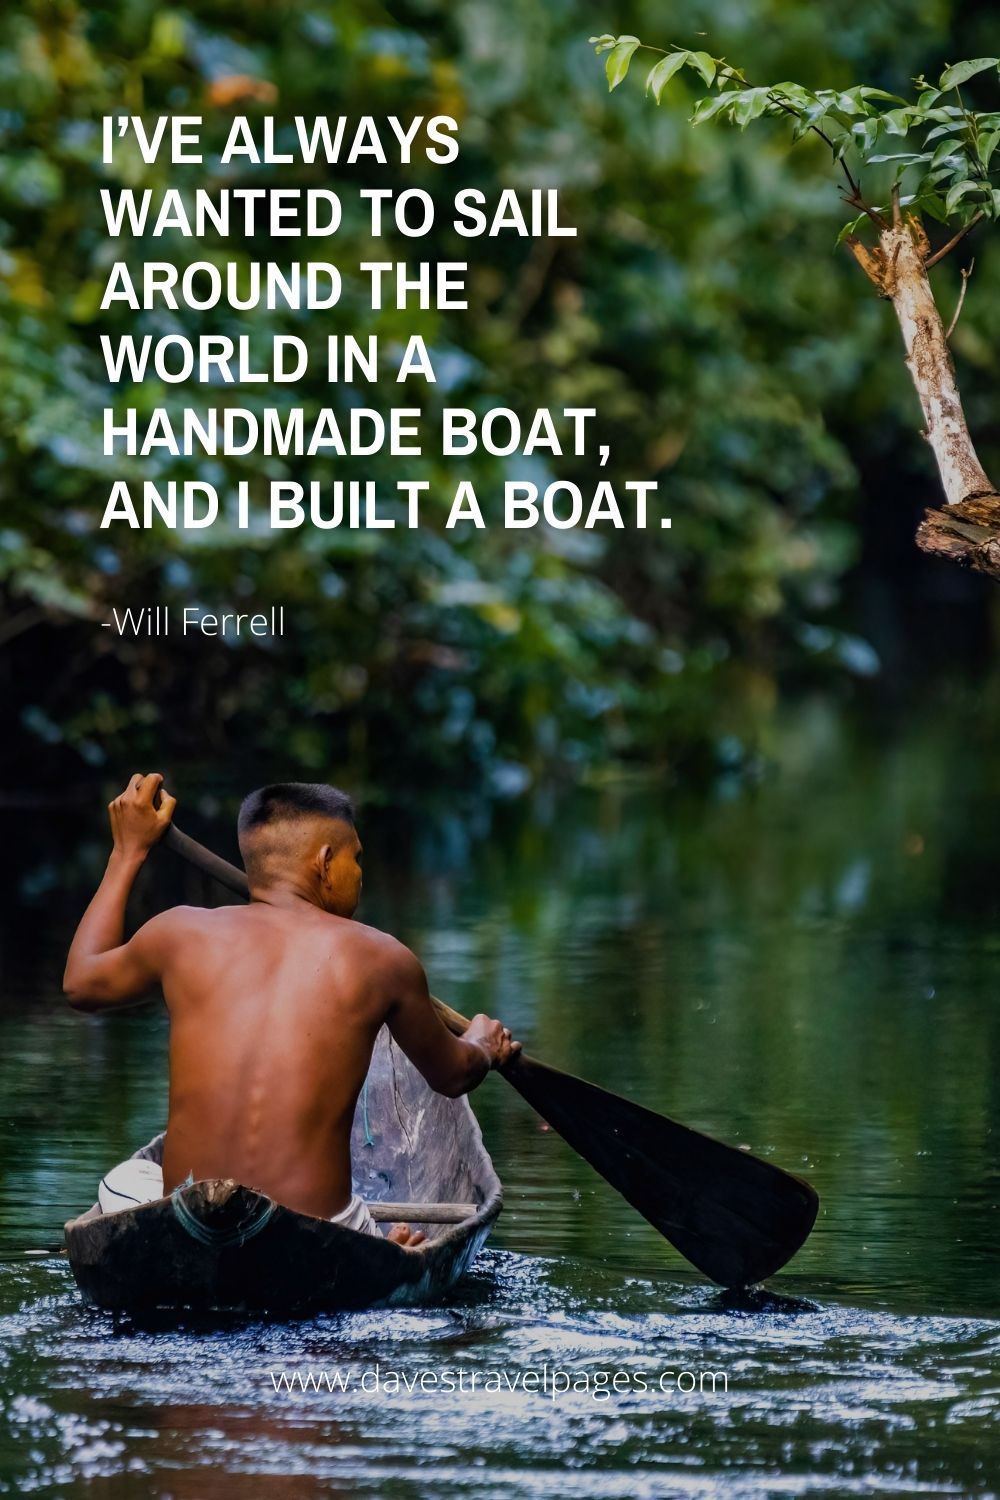 I’ve always wanted to sail around the world in a handmade boat, and I built a boat.